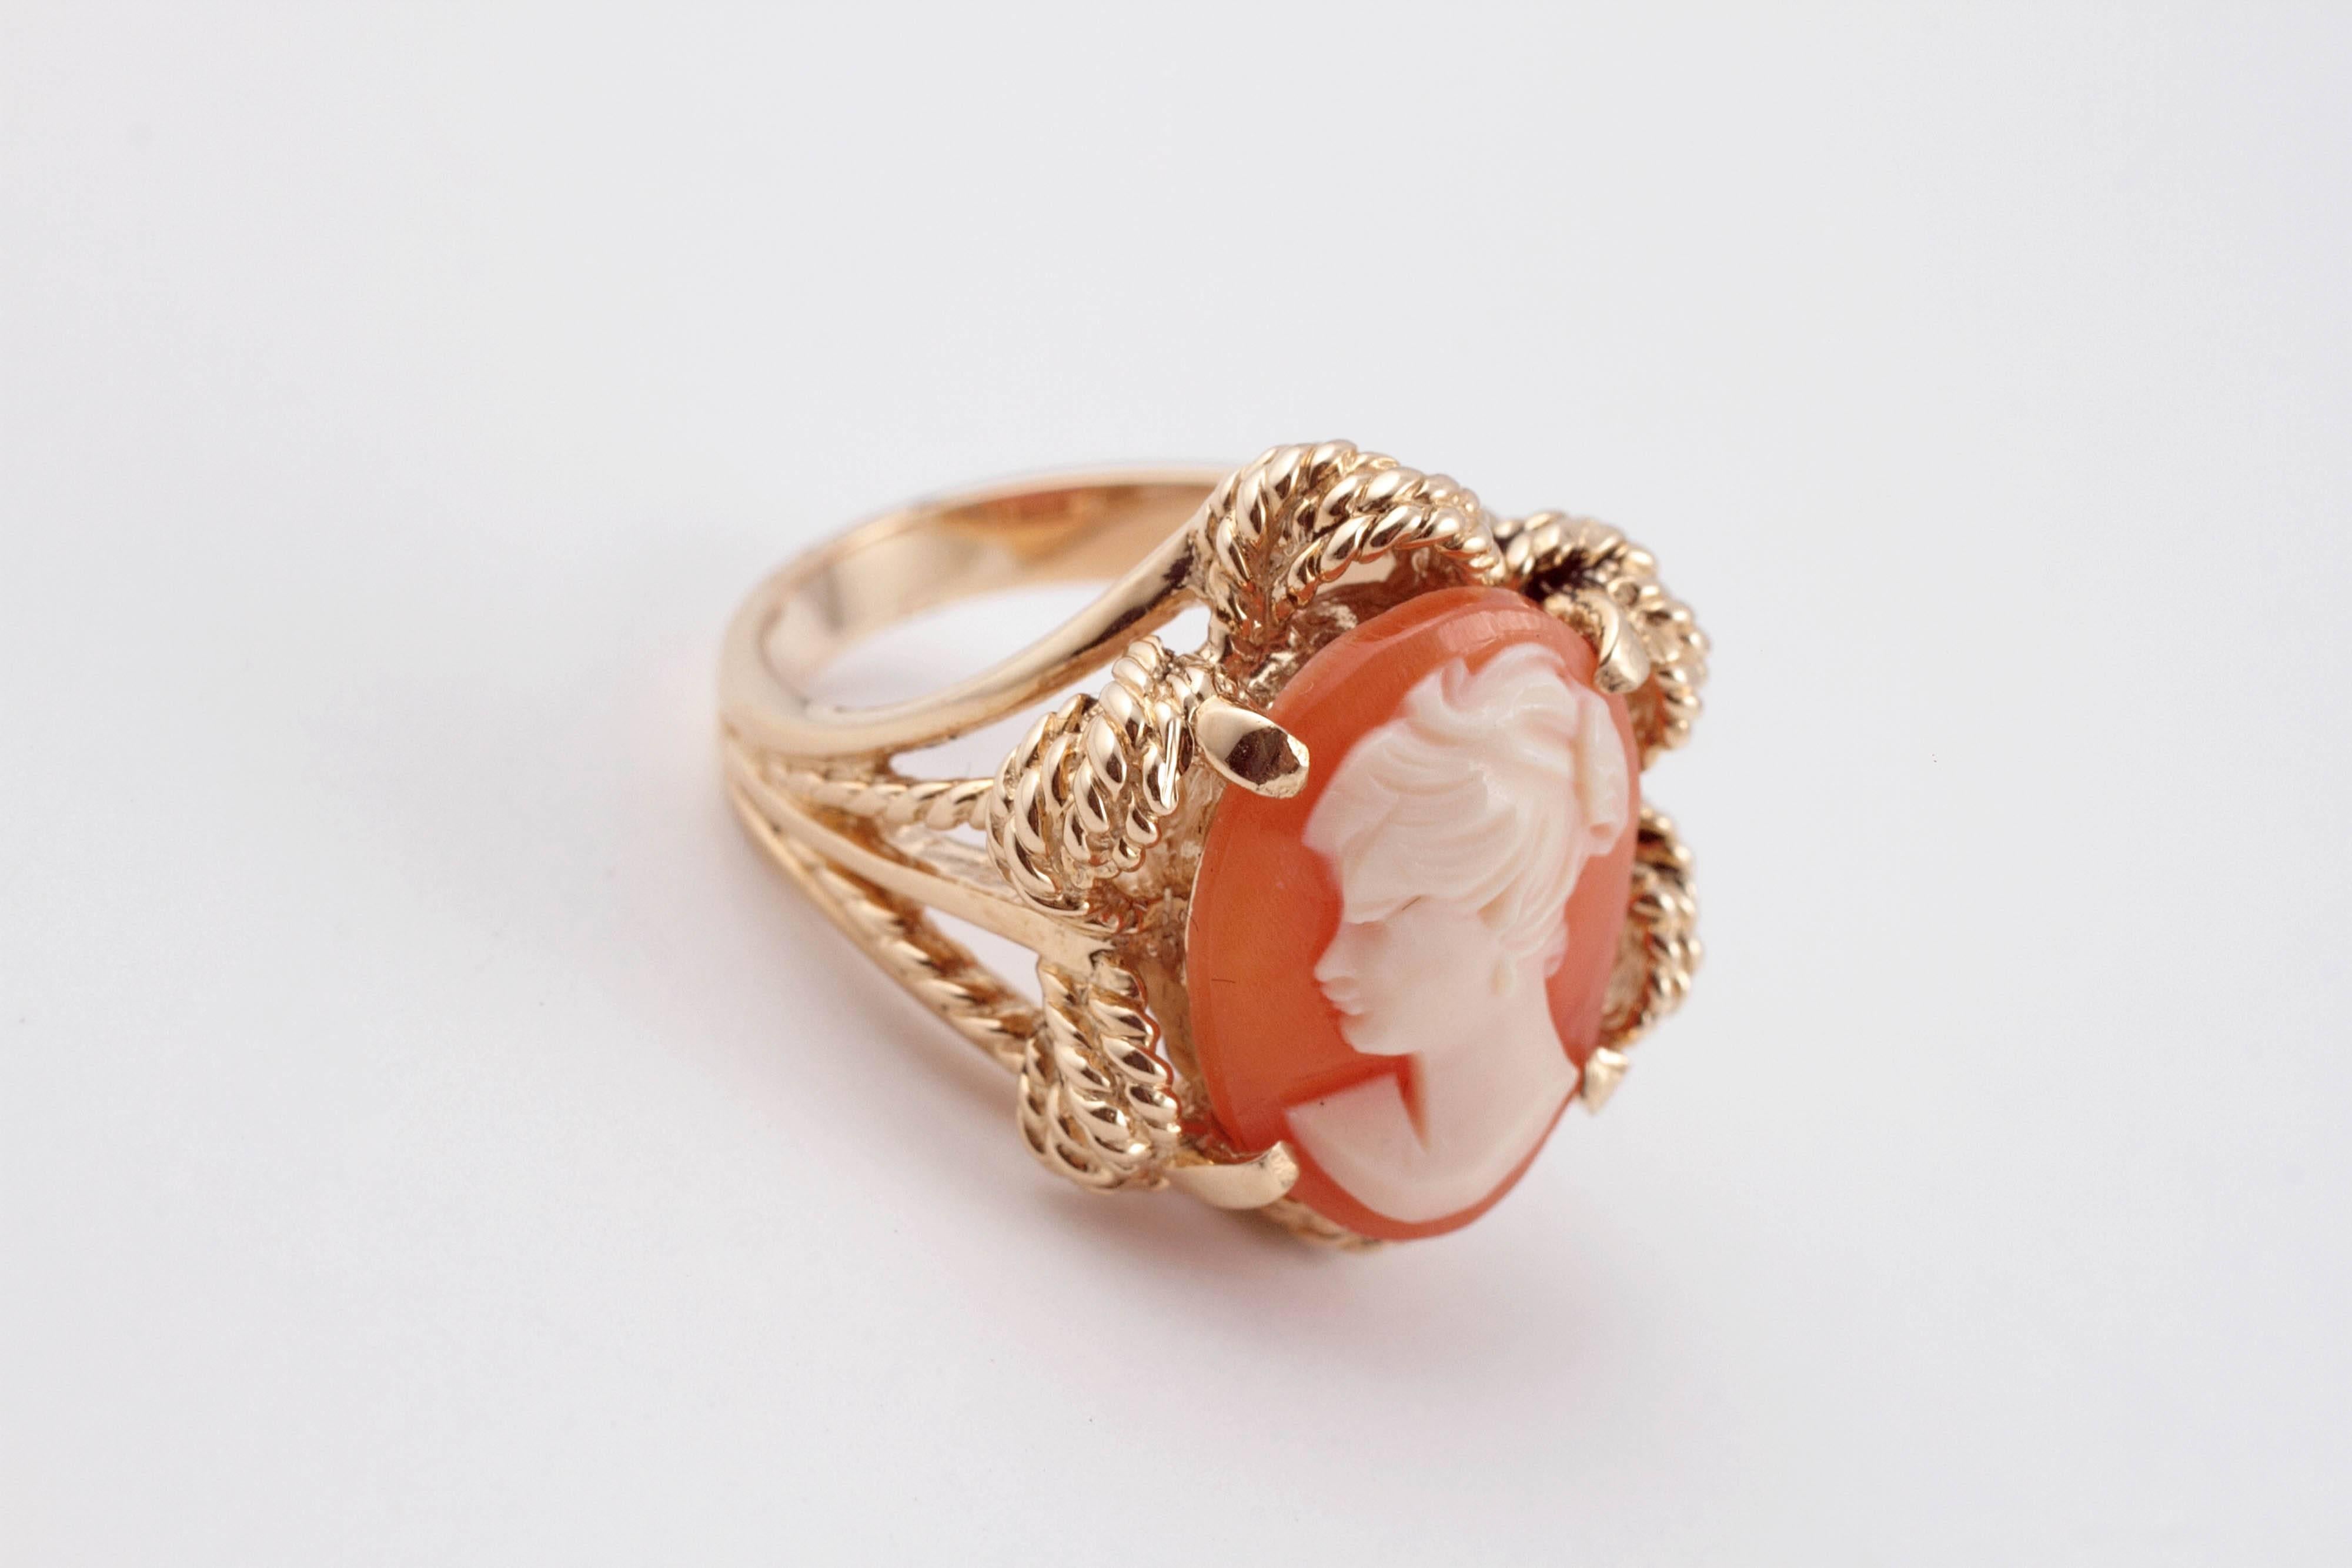 Cameo ring with rope detailing in 14 Karat yellow gold, measuring approximately 0.82